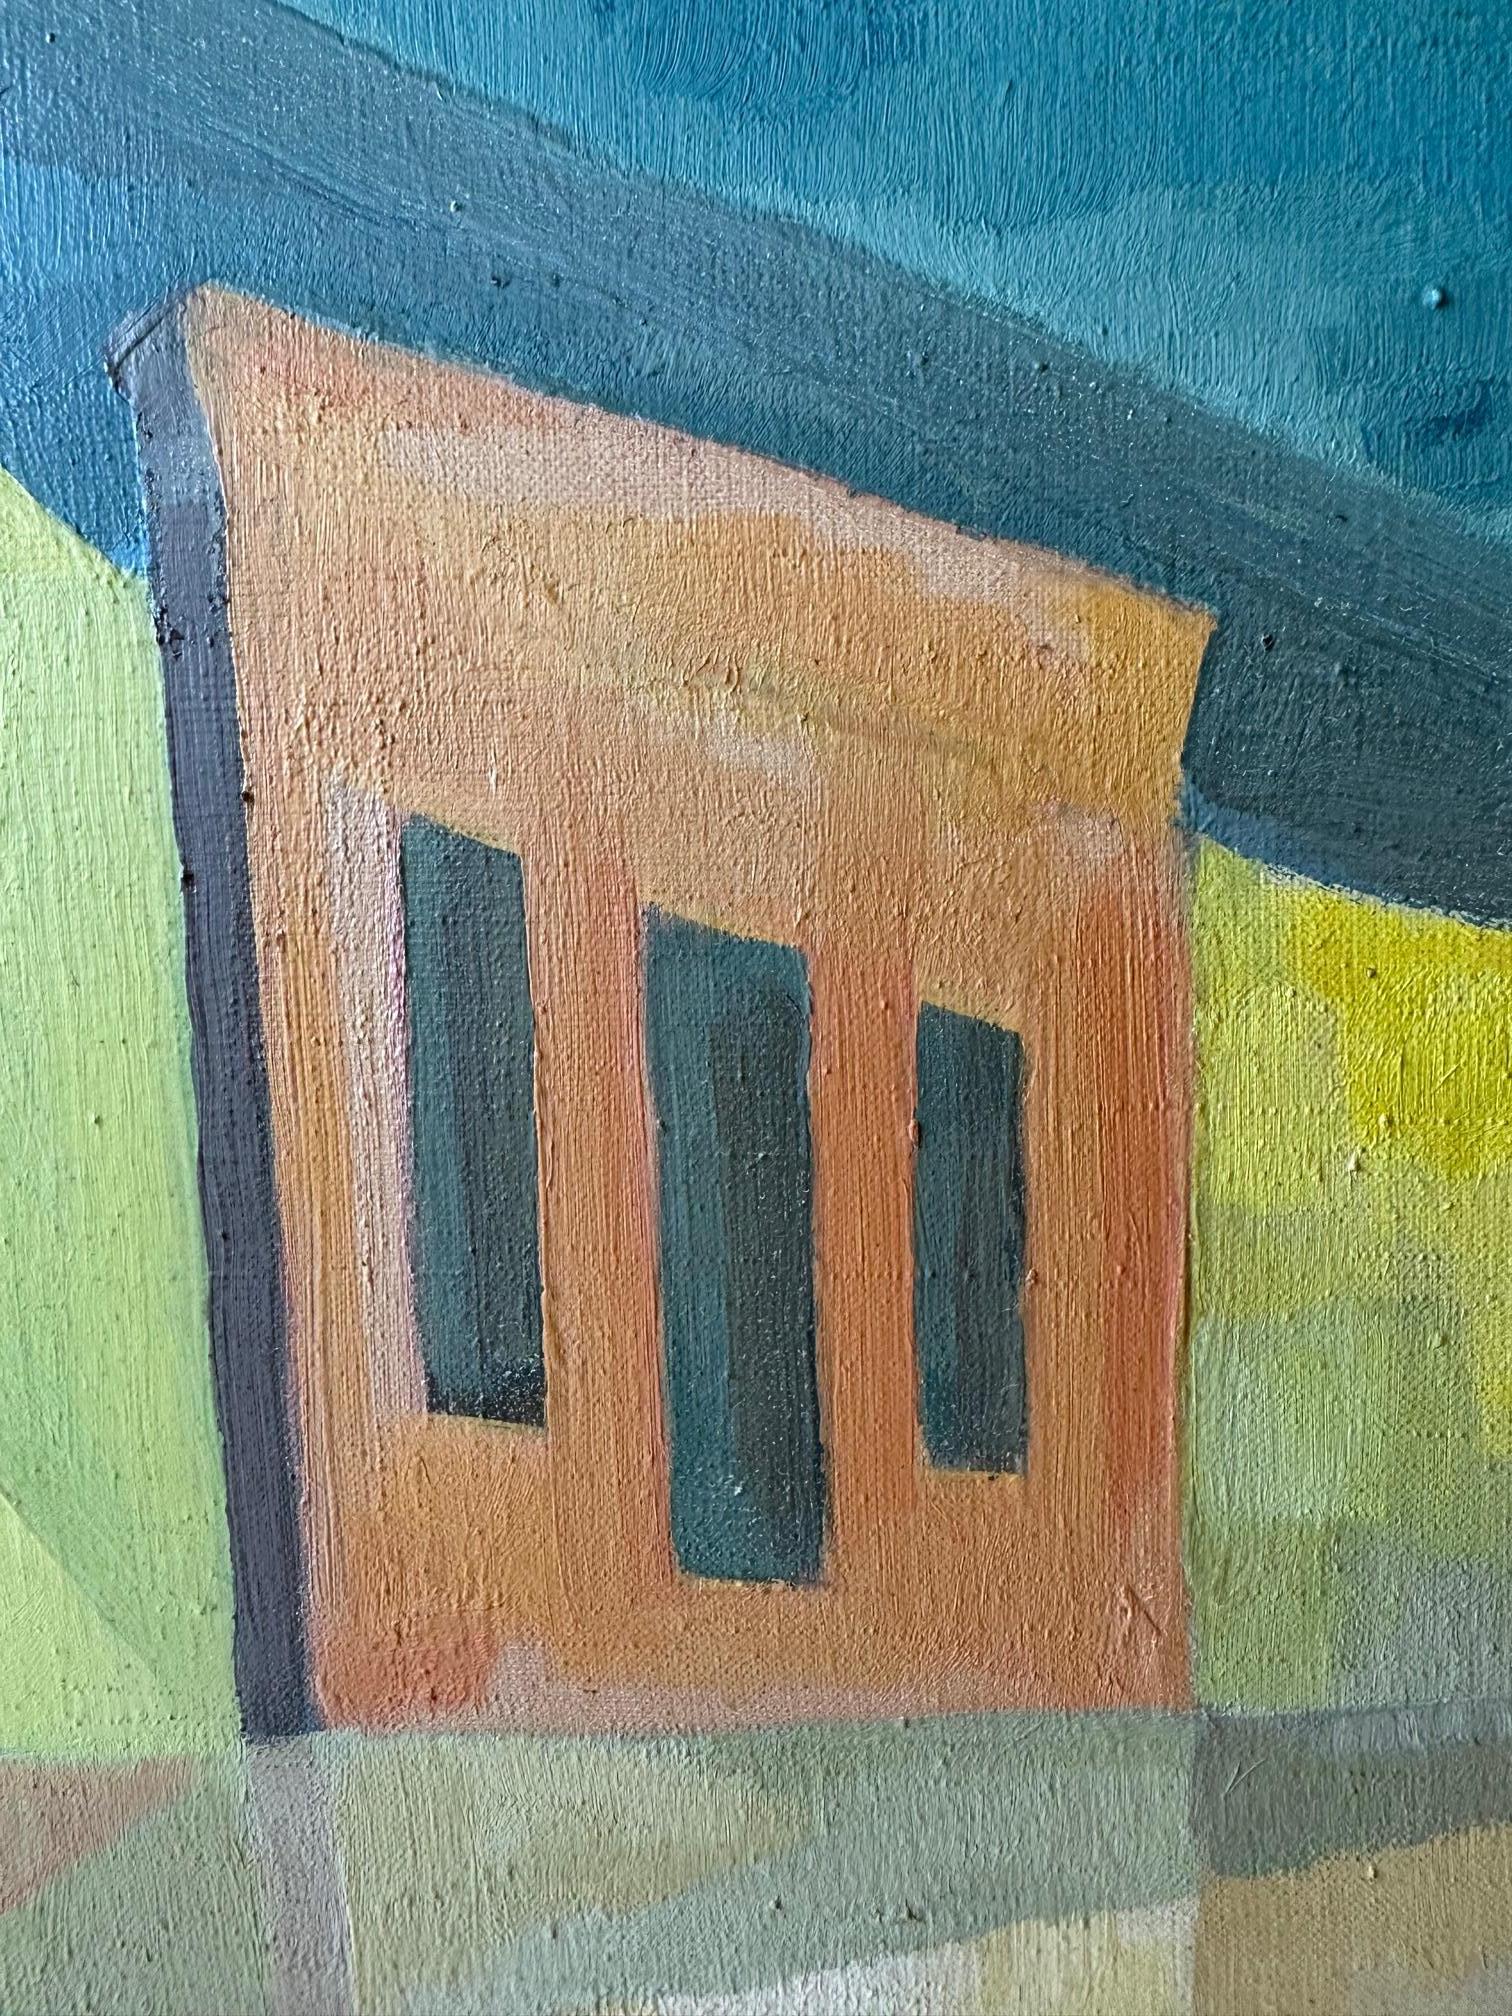 Striking original painting on canvas of an abstract row of buildings rendered boldly in yellow, orange and purple, contrasting with a grey and blue sky.
Signed Nemeth lower right.